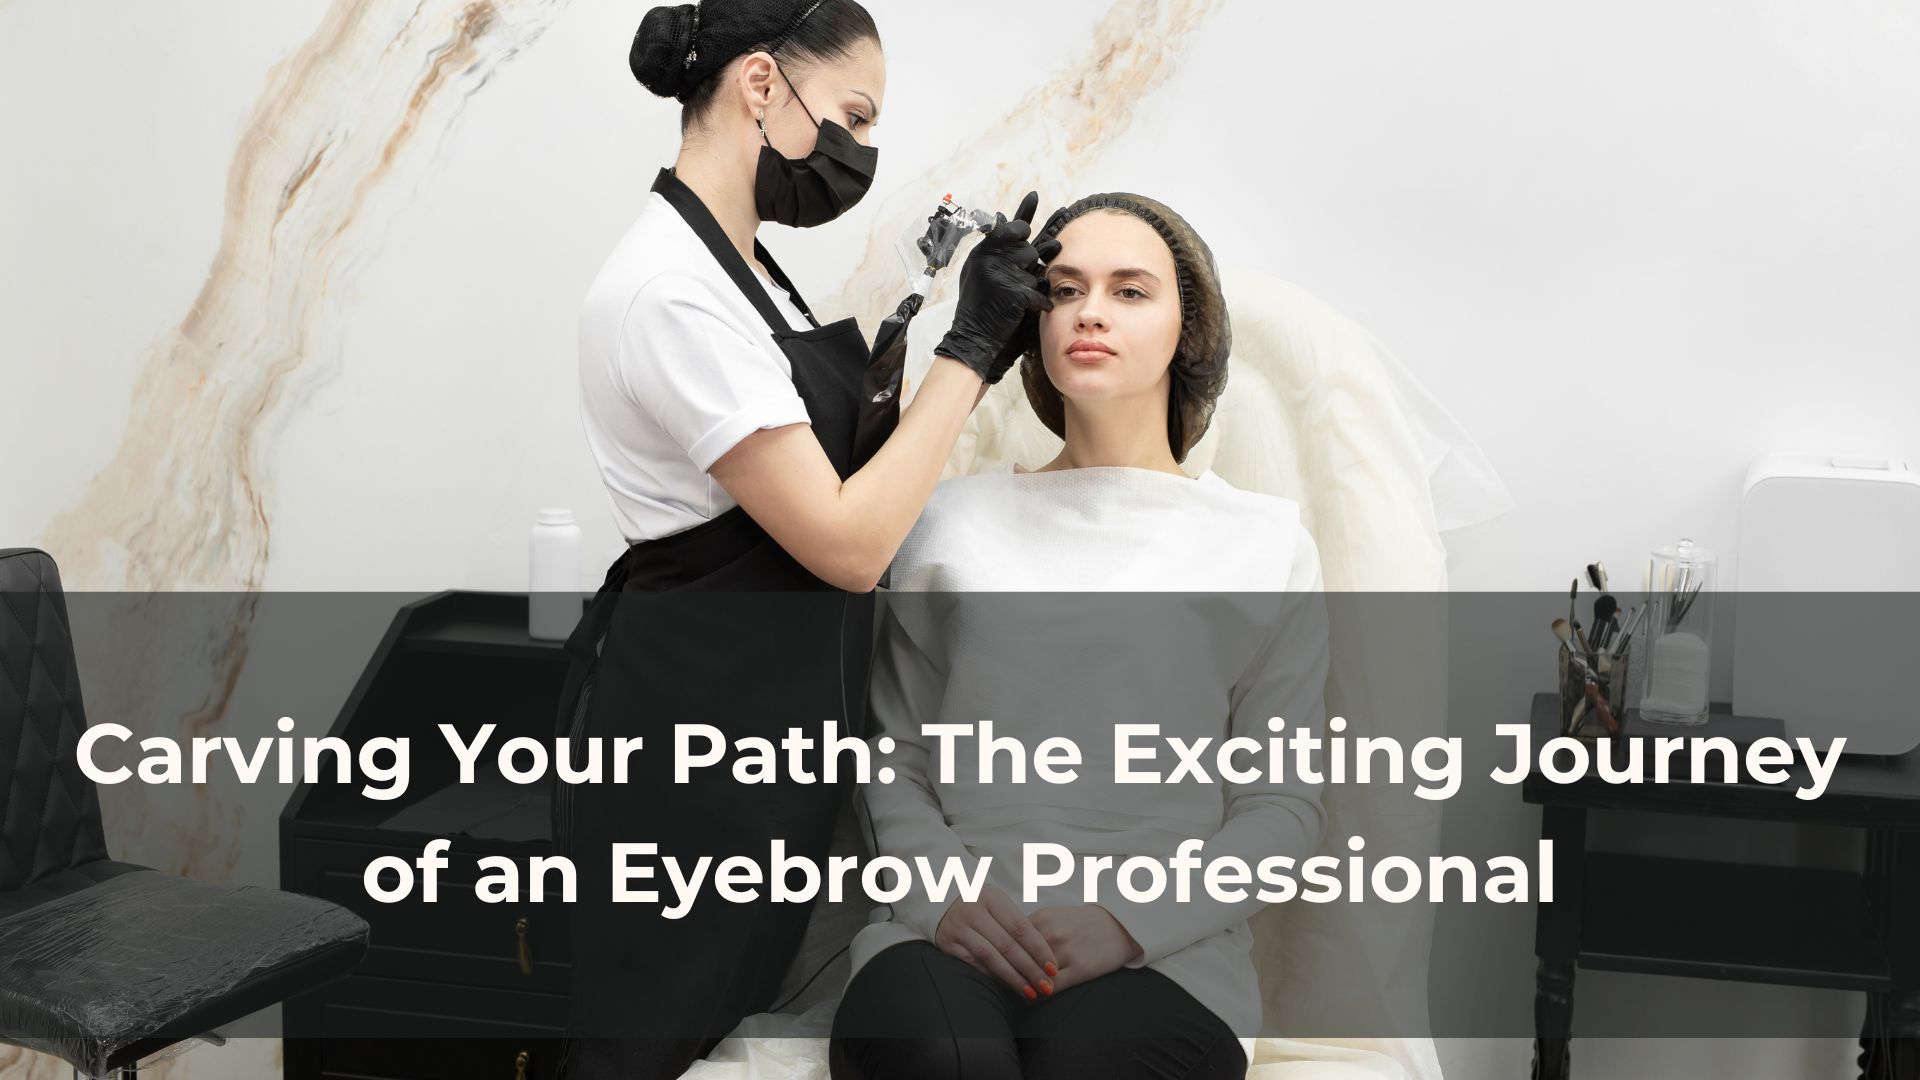 The Exciting Journey of an Eyebrow Professional